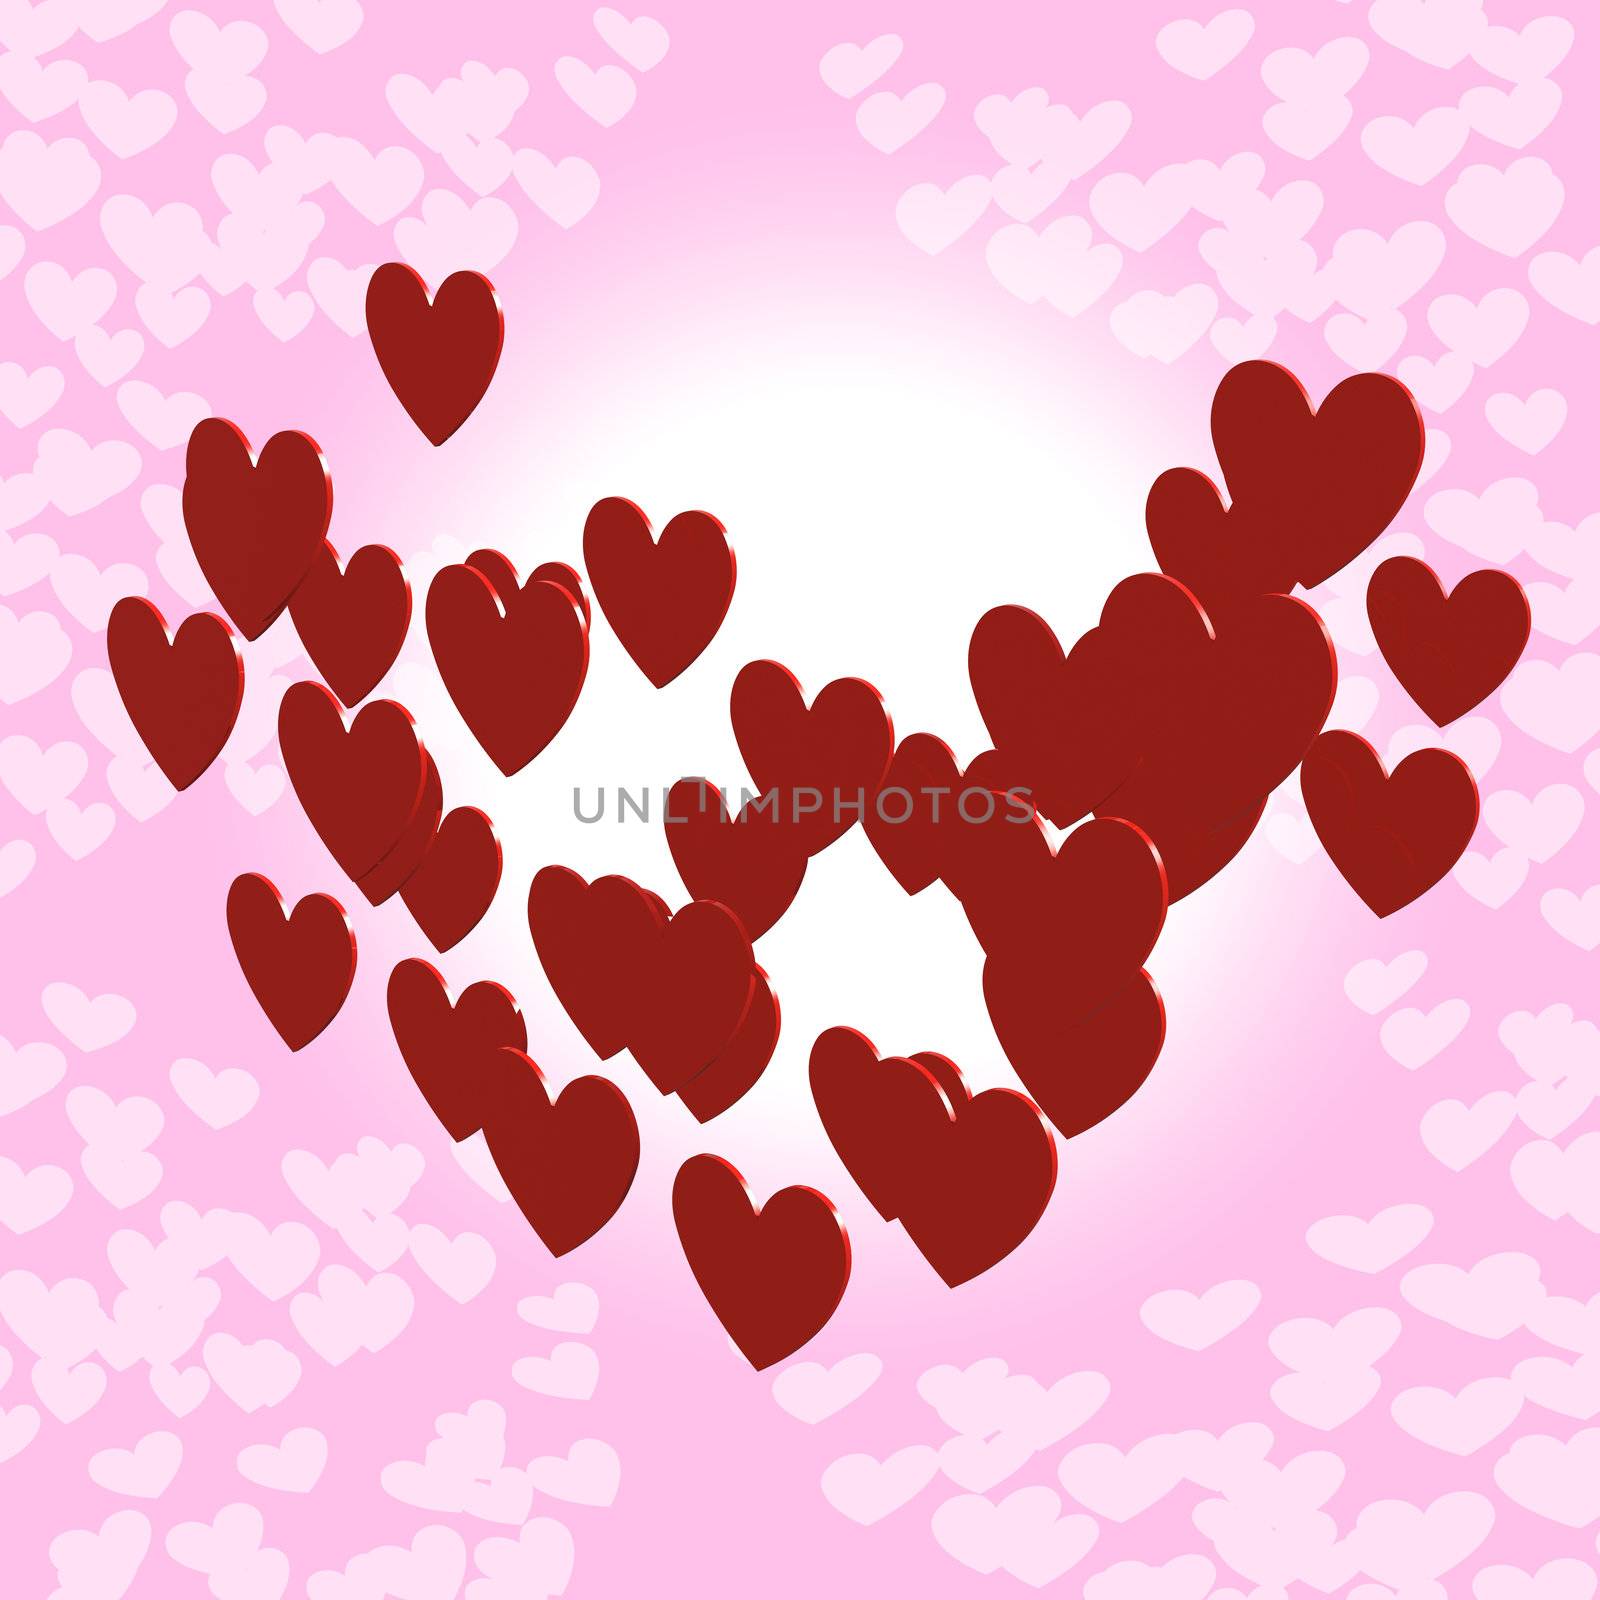 Valentine hearts on pink background by siraanamwong